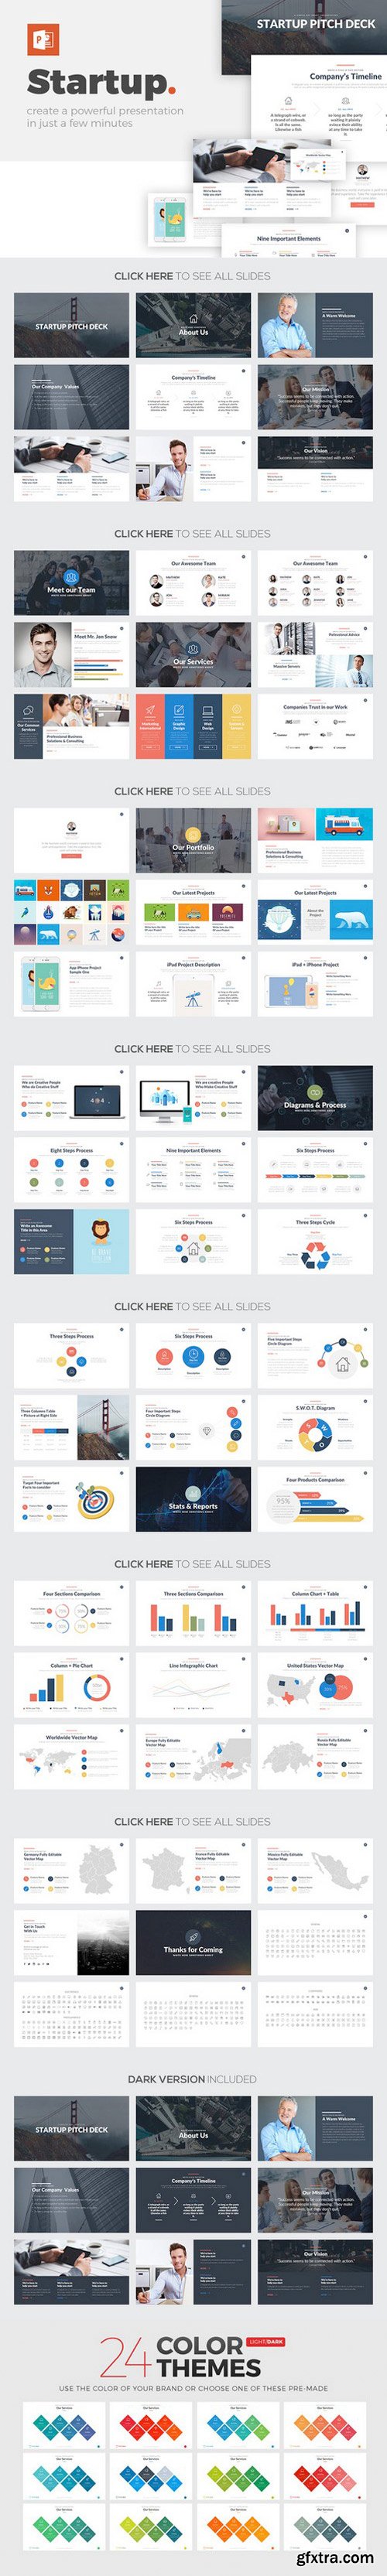 CM - Startup PowerPoint Template 763939